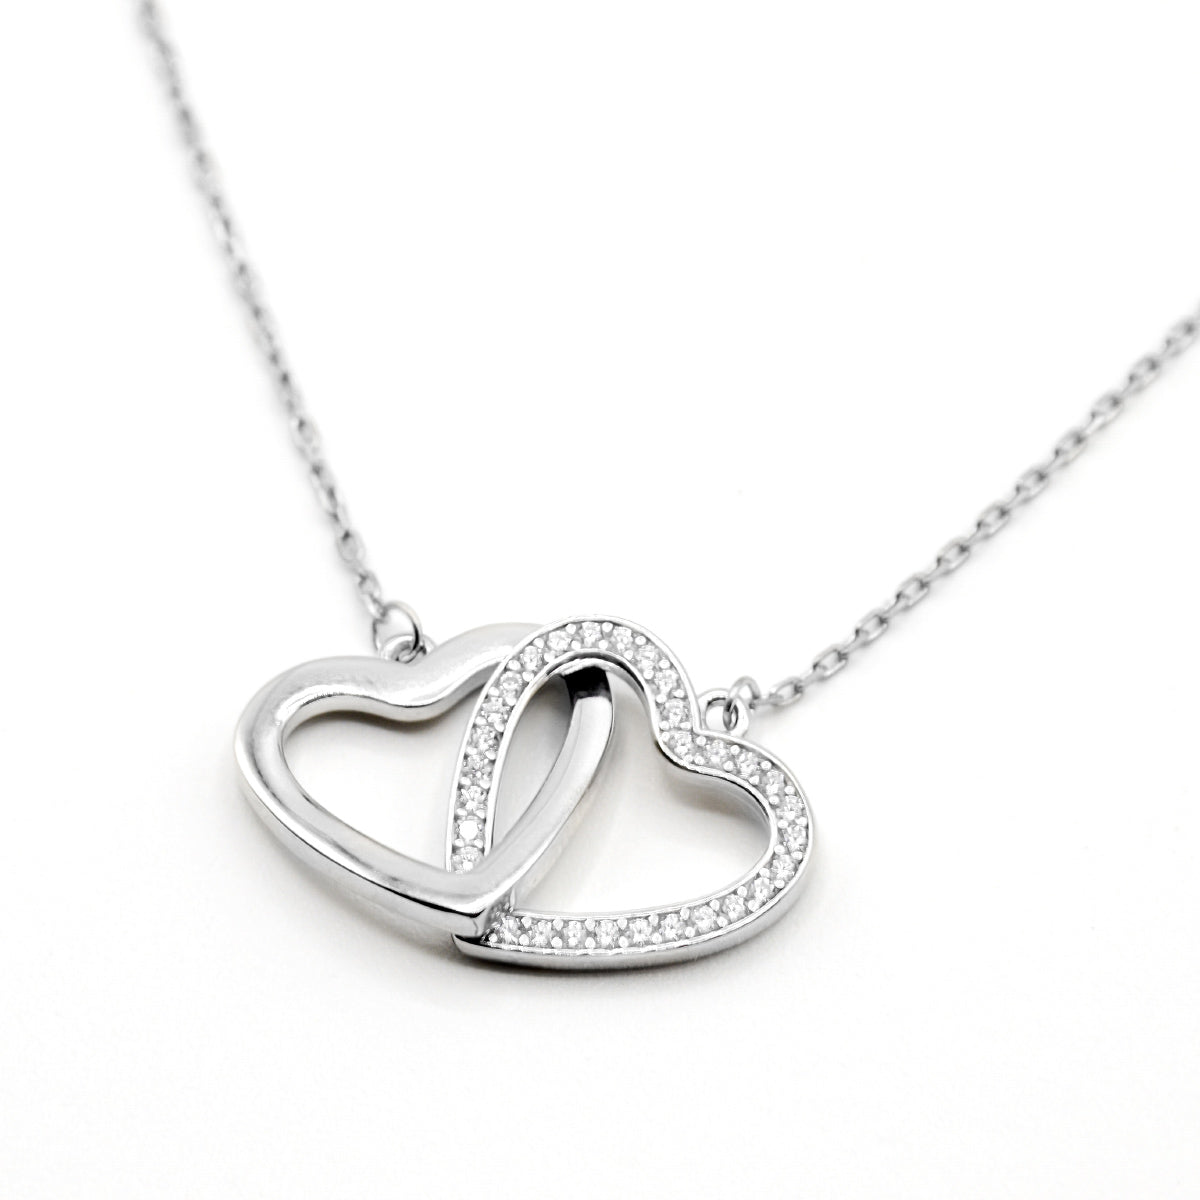 Mother & Daughter, No matter Where We Go - Sterling Silver Joined Hearts Necklace Gift Set